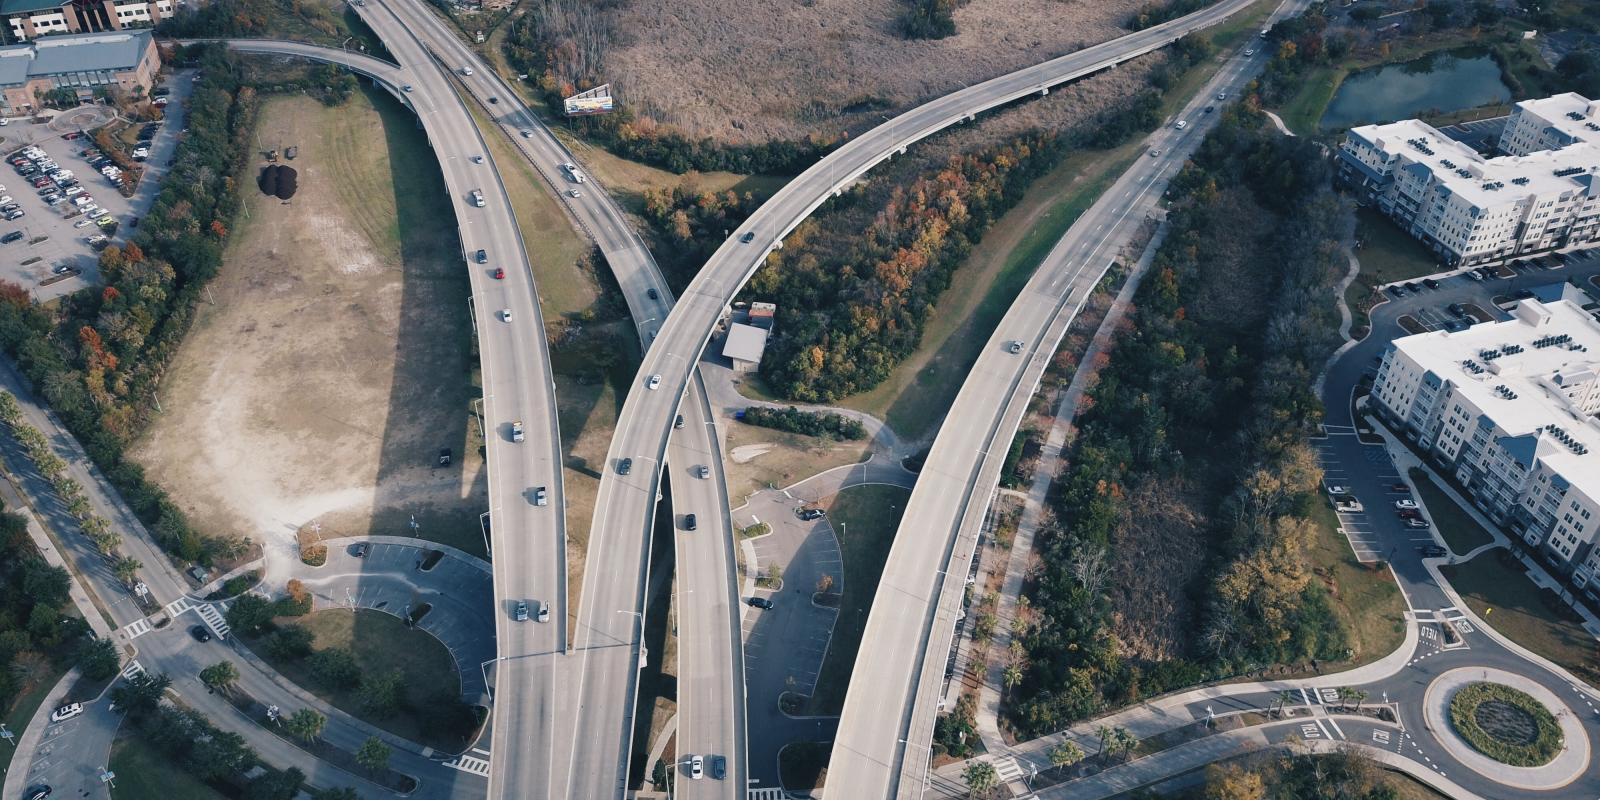 Aerial view of a freeway in the United States